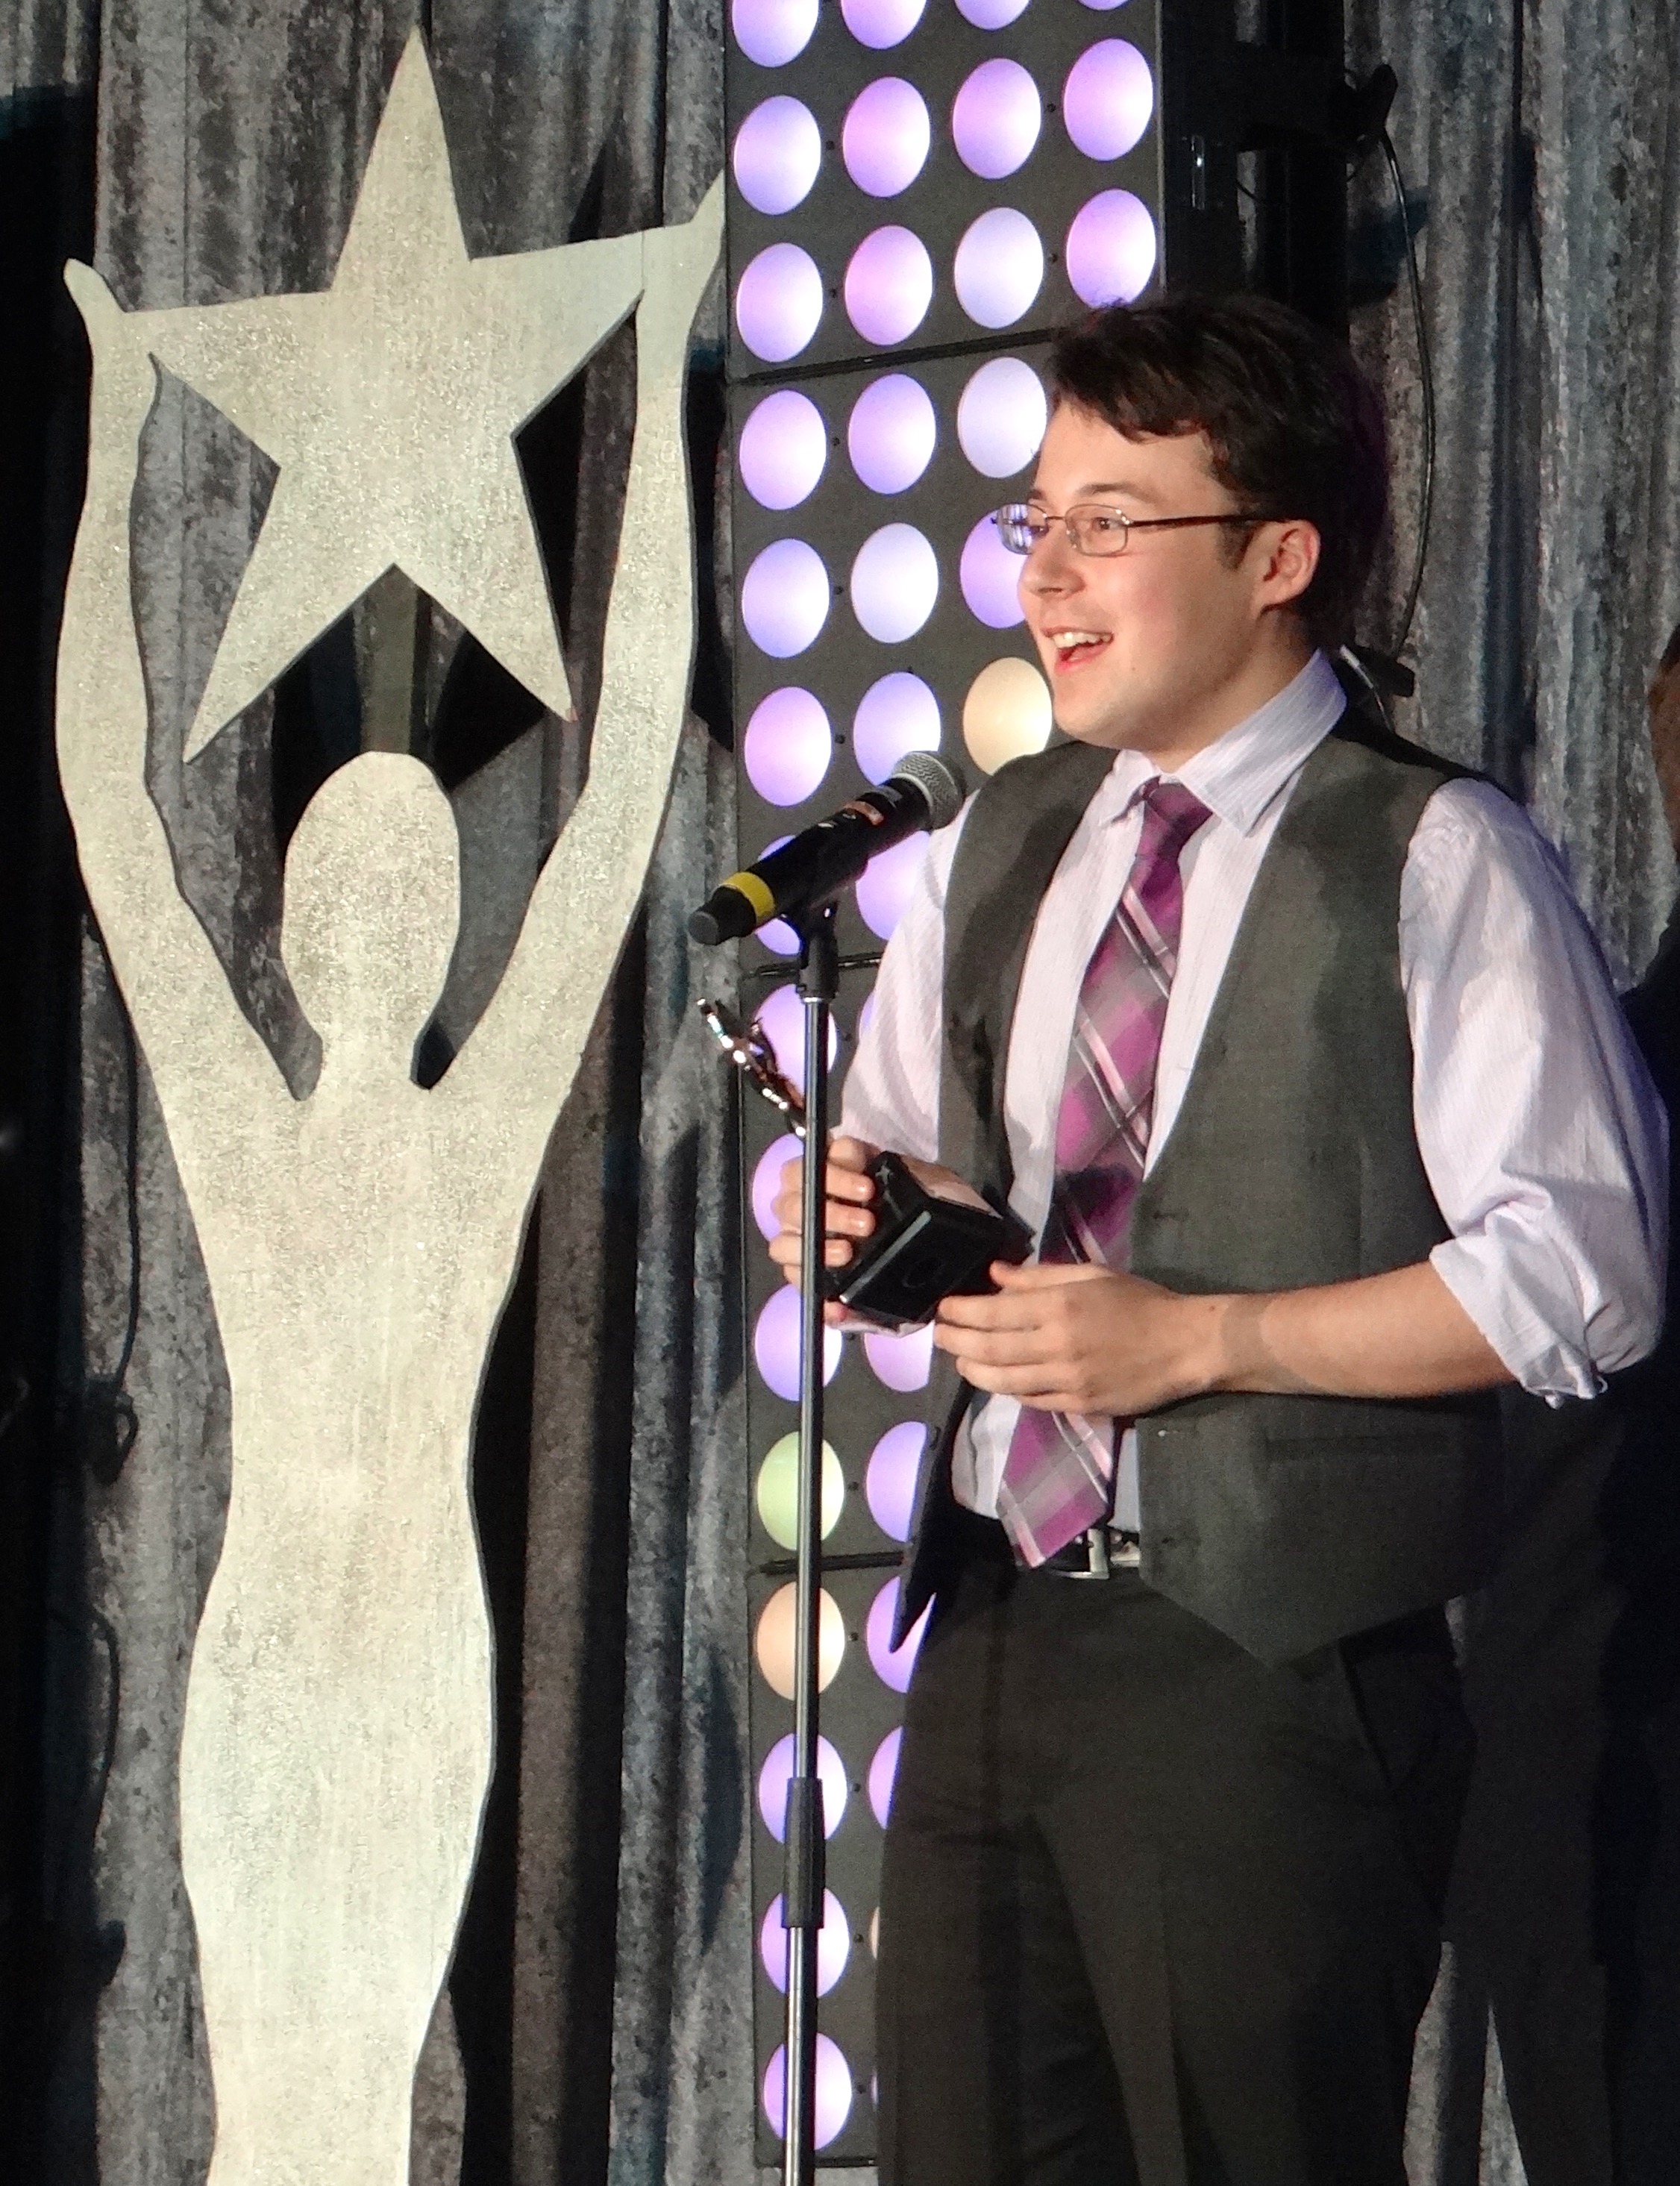 2014 Young Artist Awards - Best Young Actor in a Television Series - Guest Starring Role